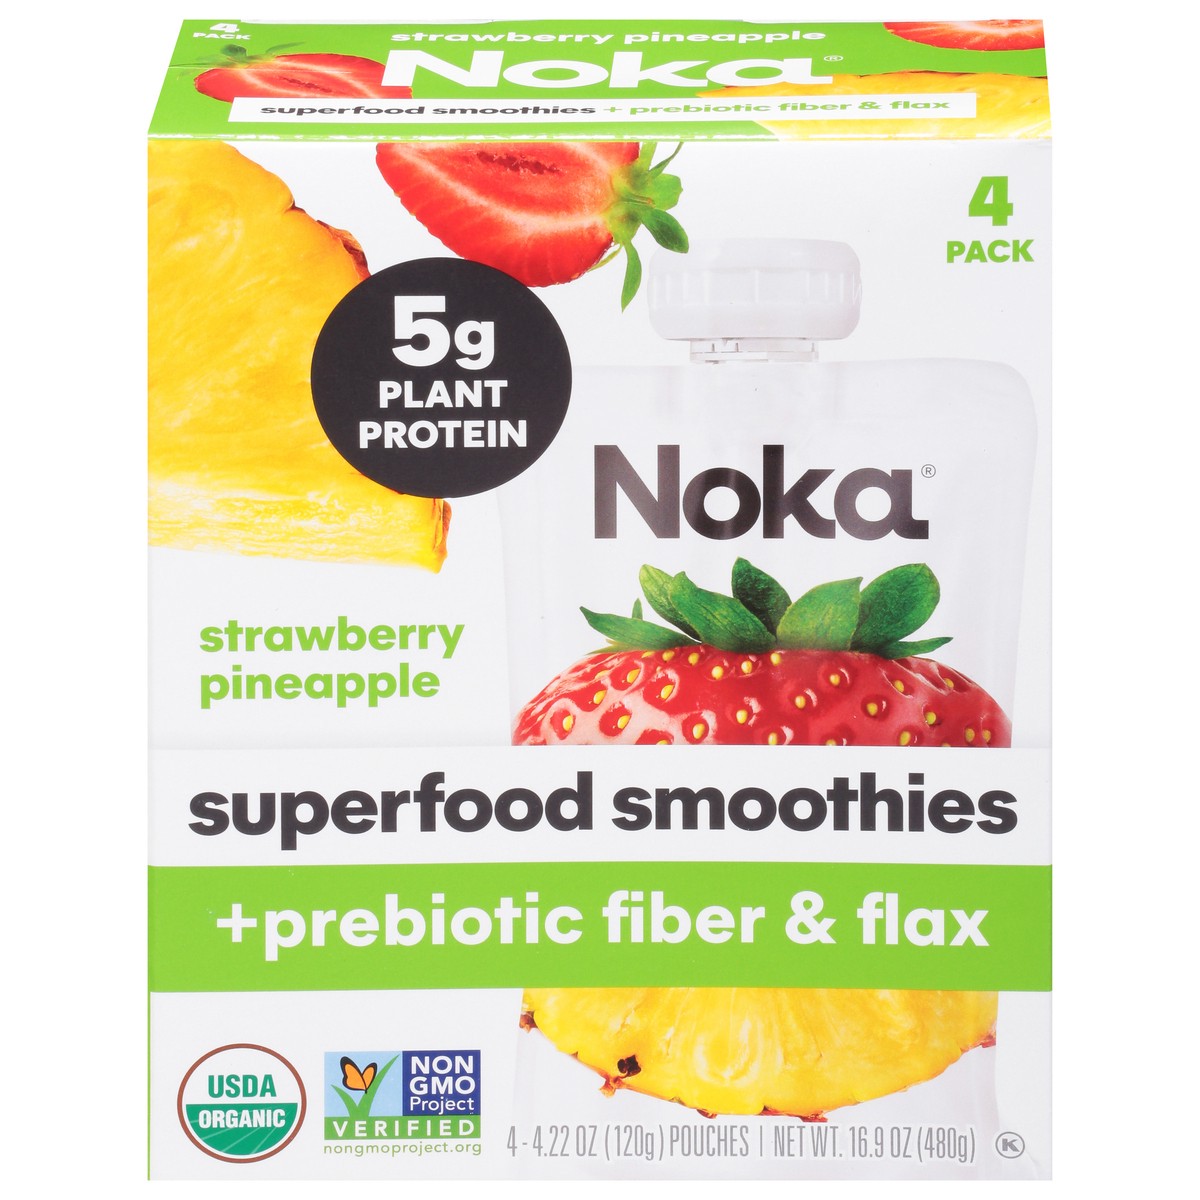 slide 1 of 14, NOKA 4 Pack Strawberry Pineapple Superfood Smoothies 4 - 4.22 oz Pouches, 4 ct